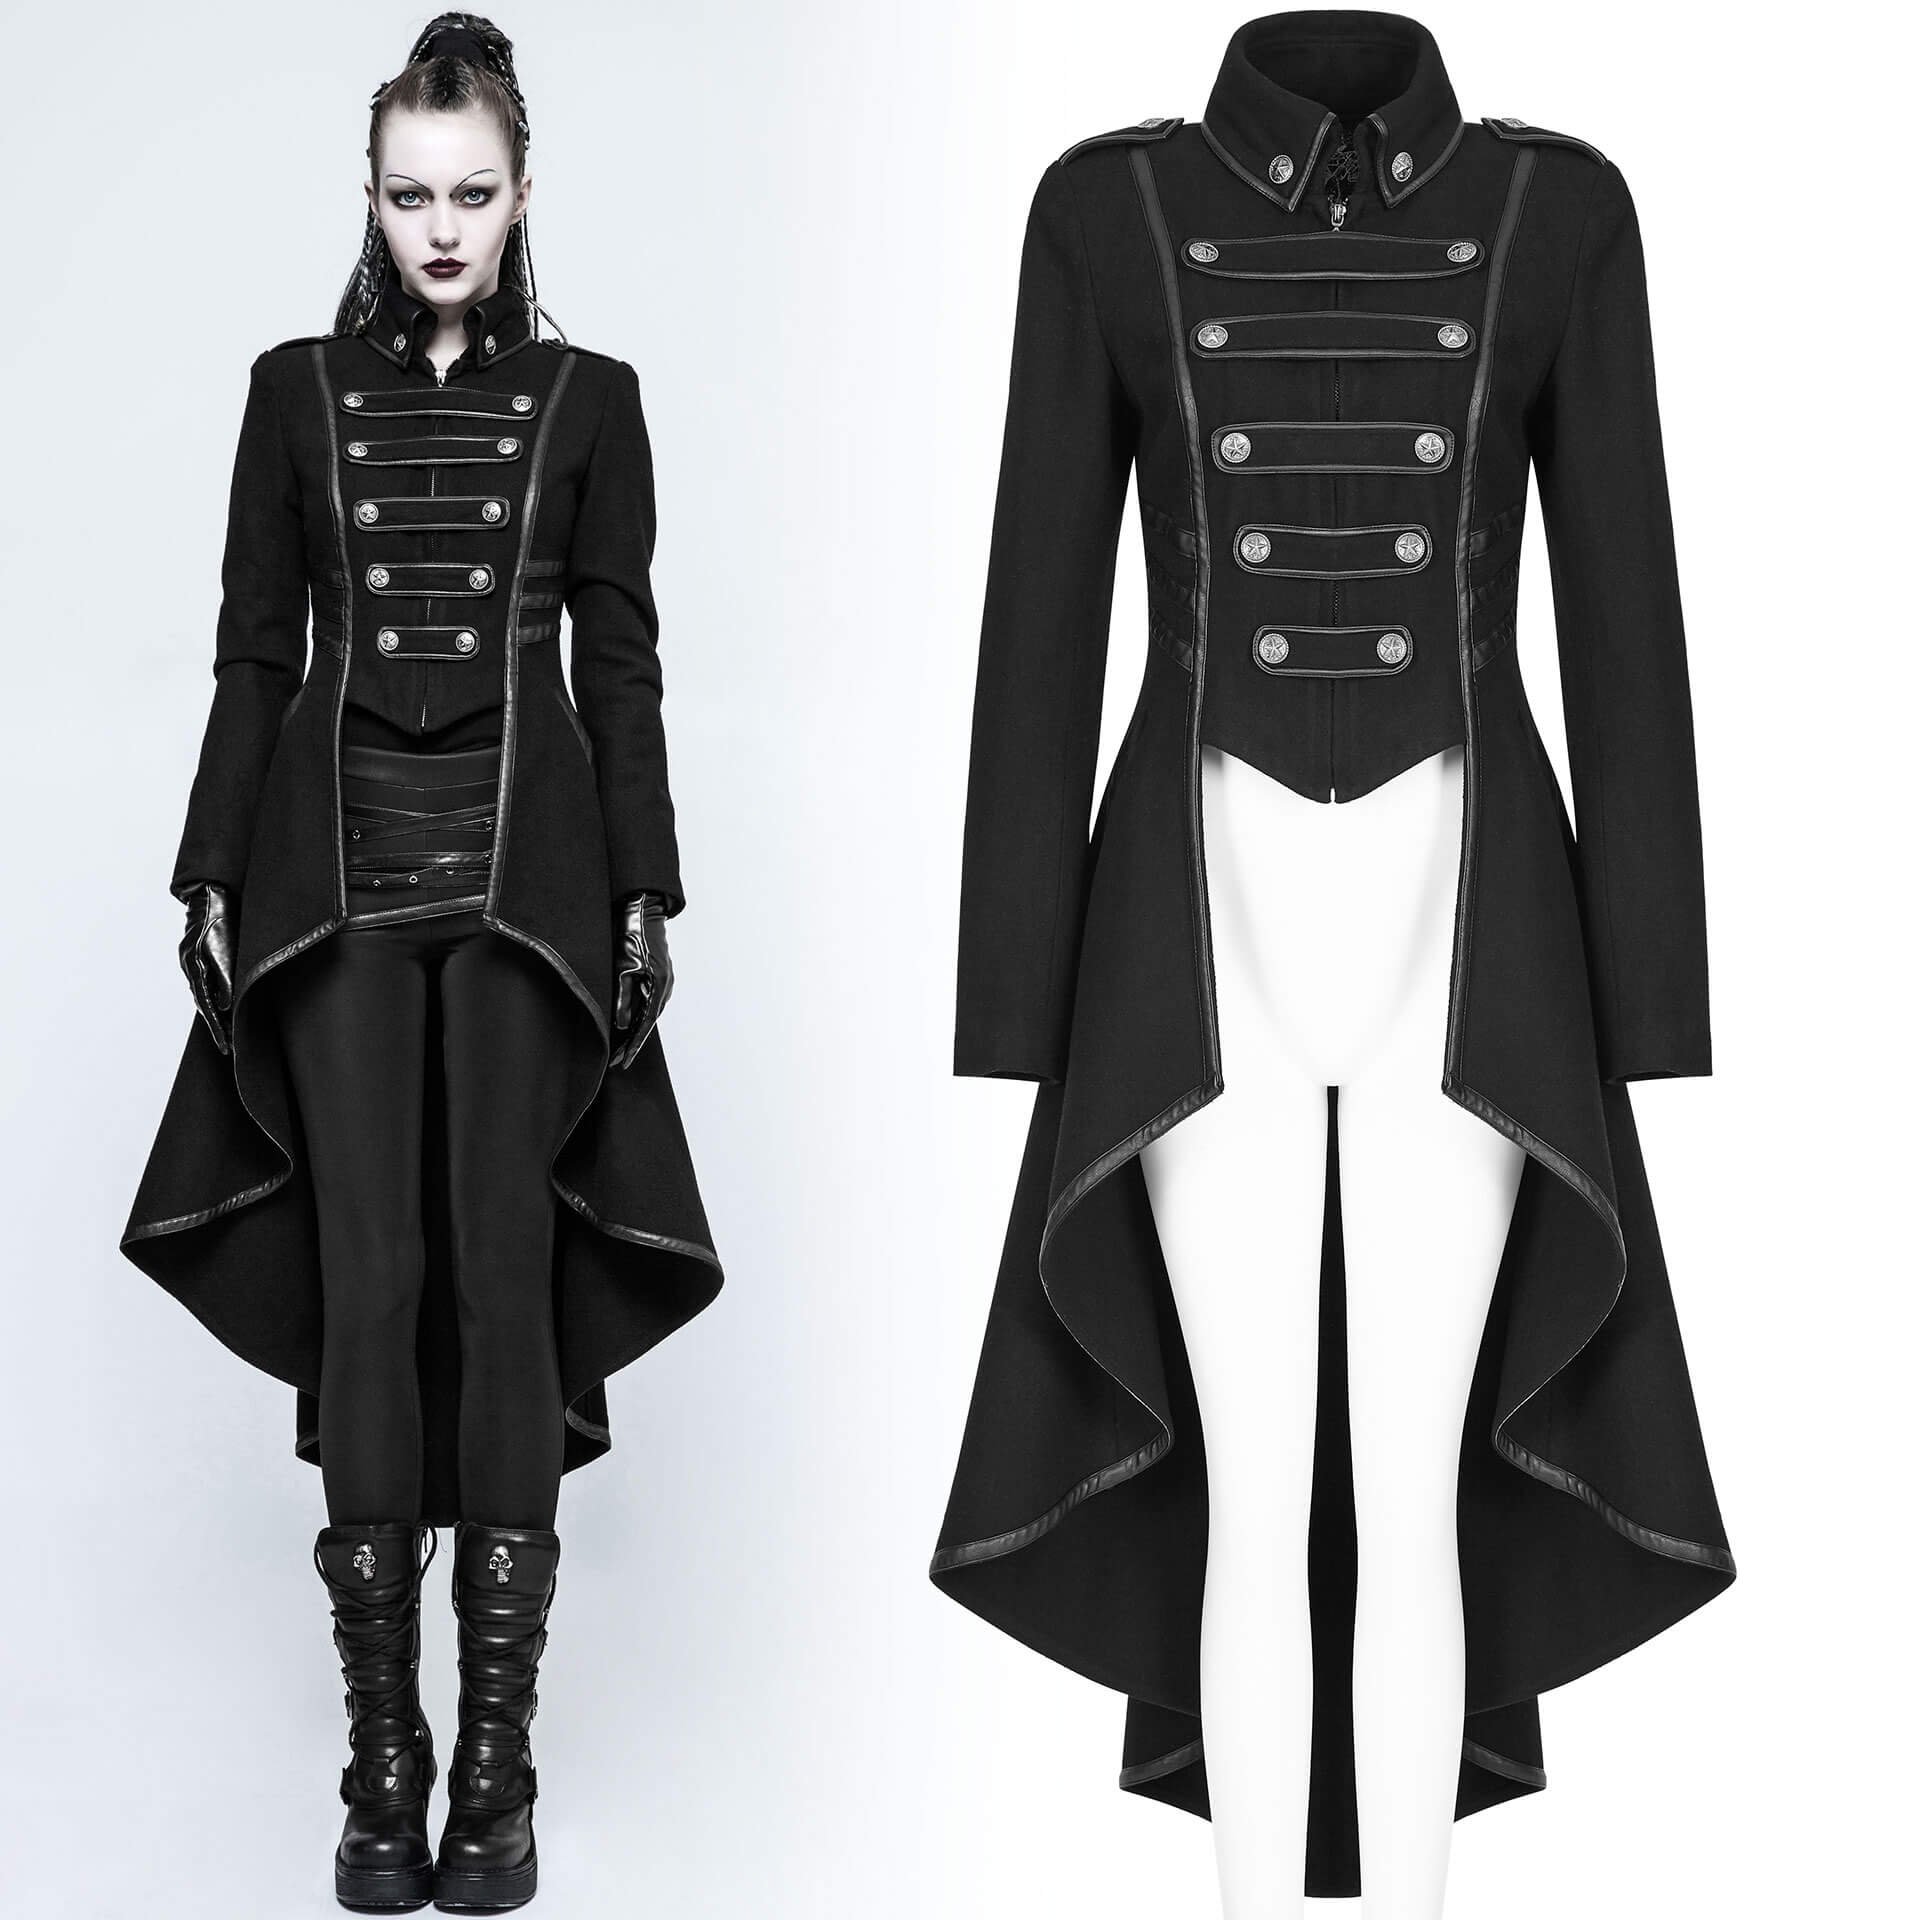 The Gothic Army Coat by Punk Rave brand